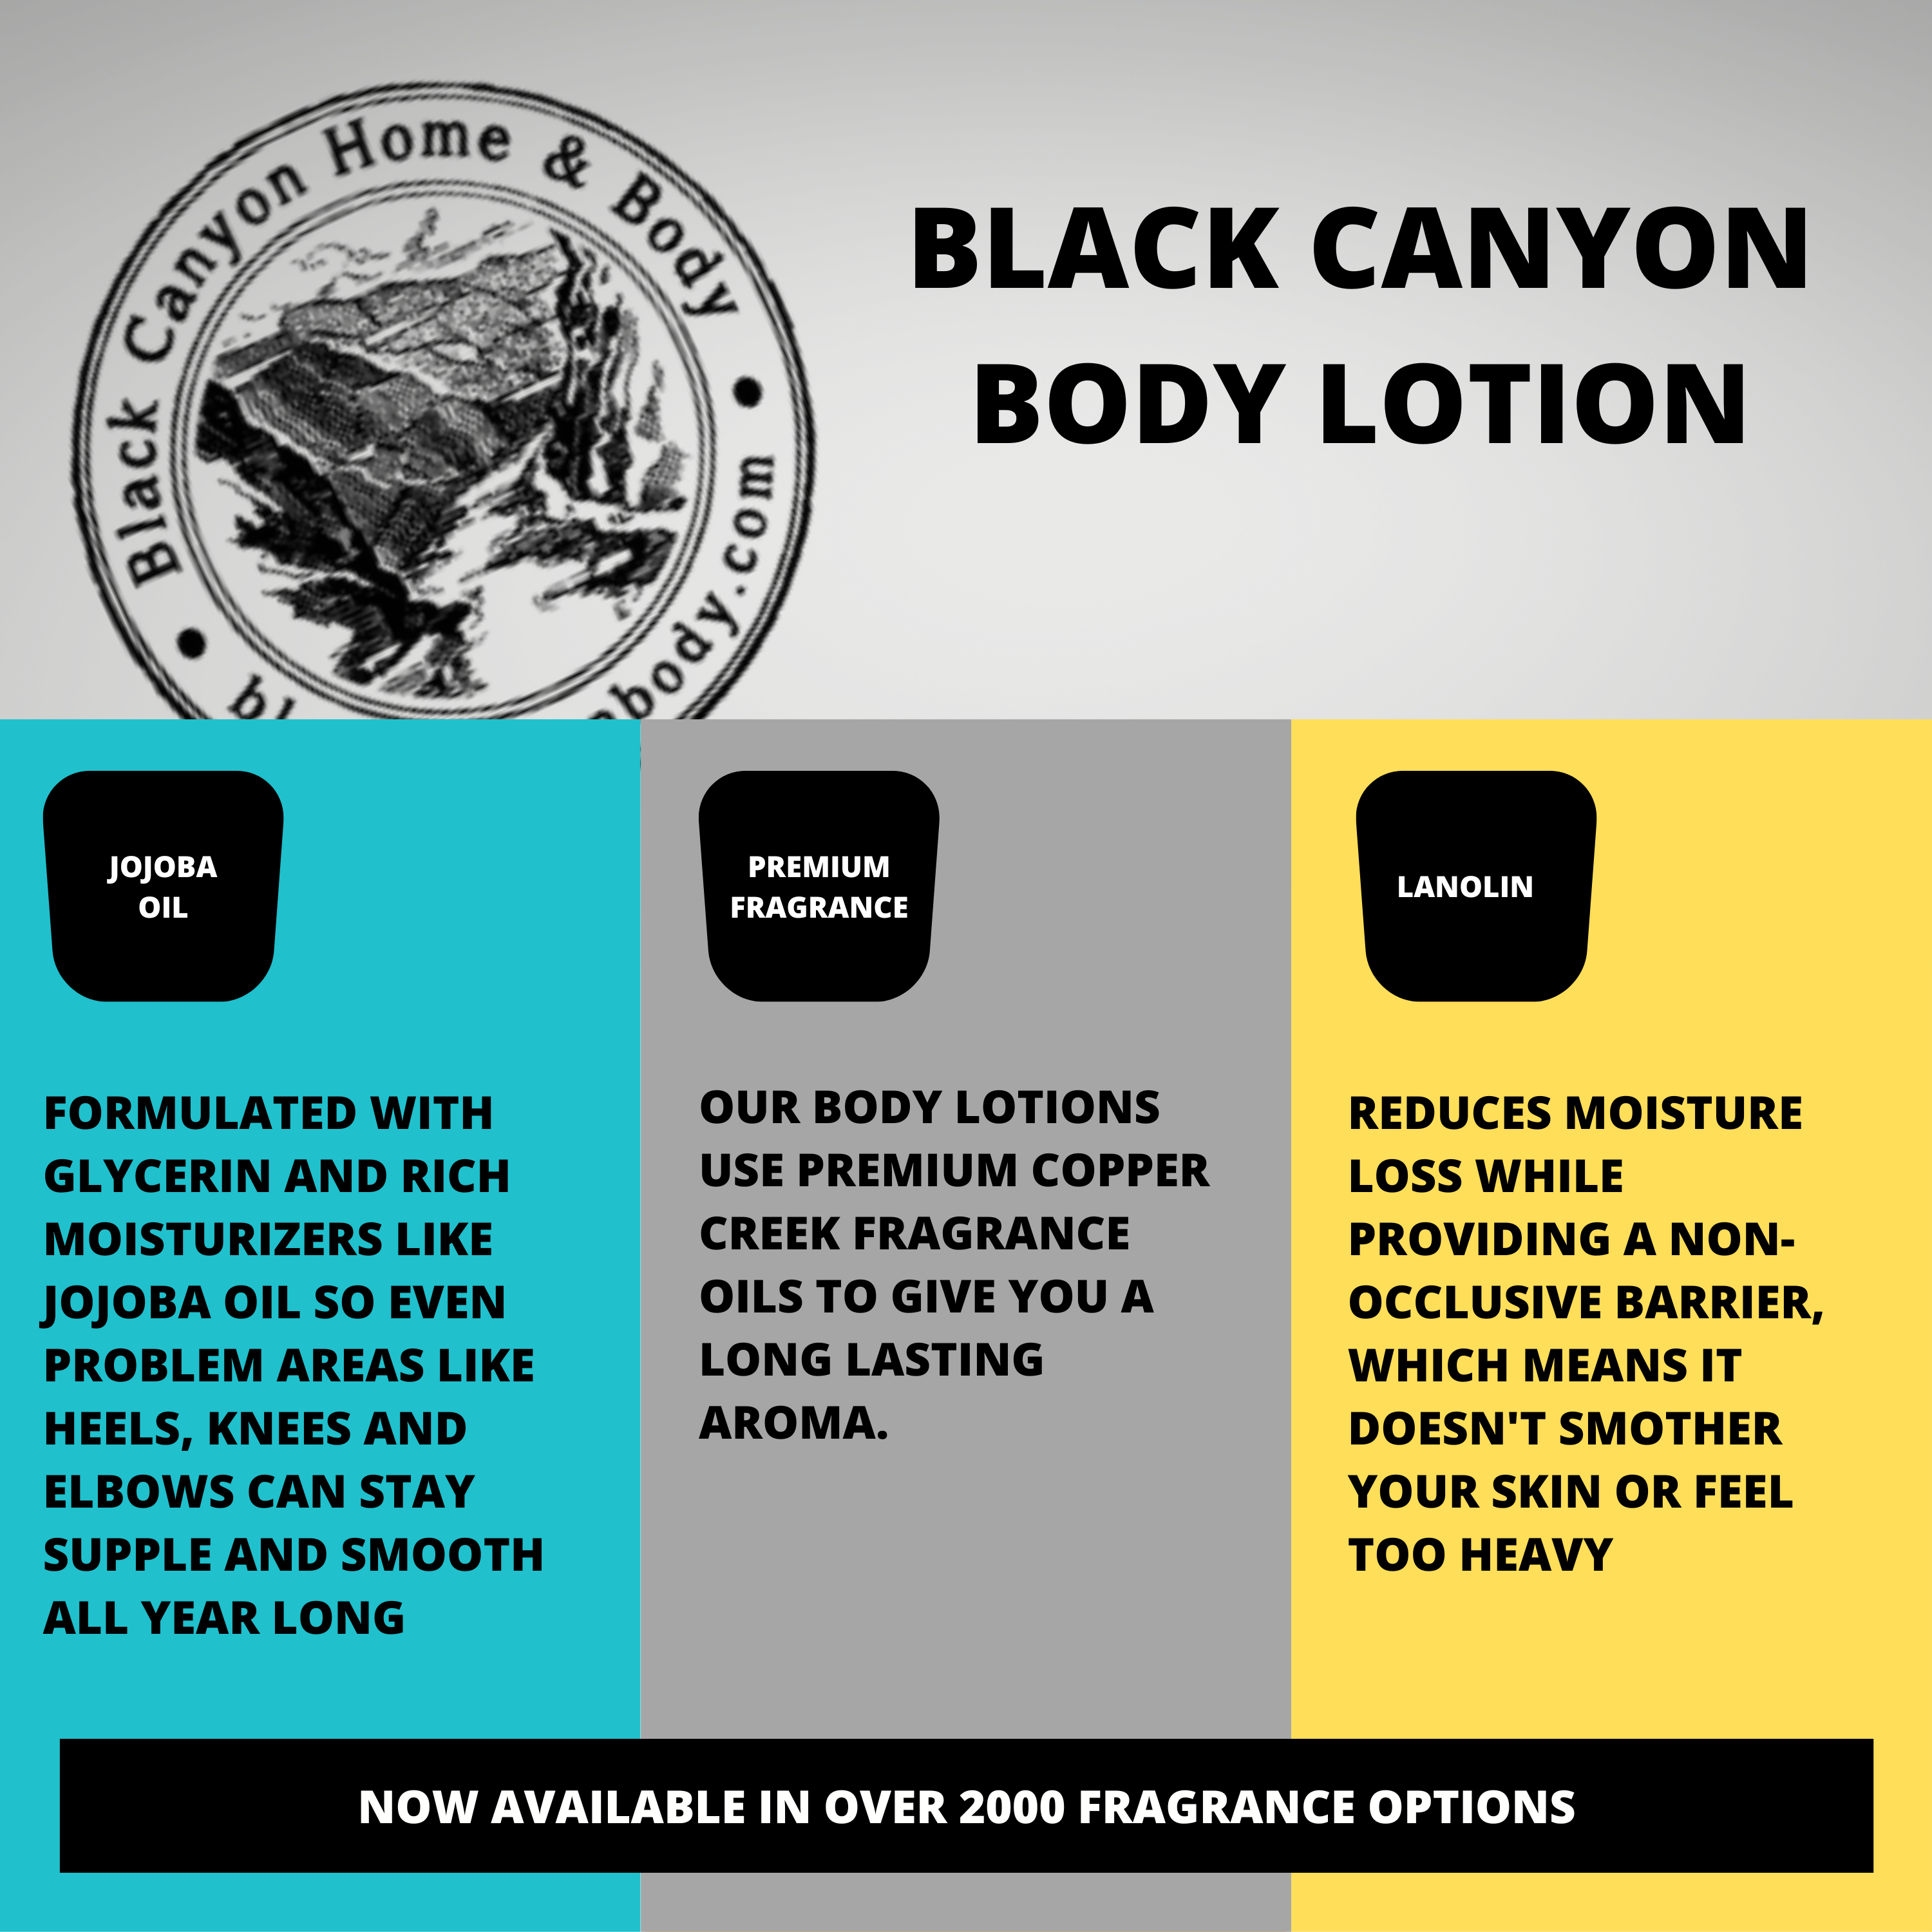 Black Canyon Apple Pecan Fritter Scented Luxury Body Lotion with Lanolin and Jojoba Oil